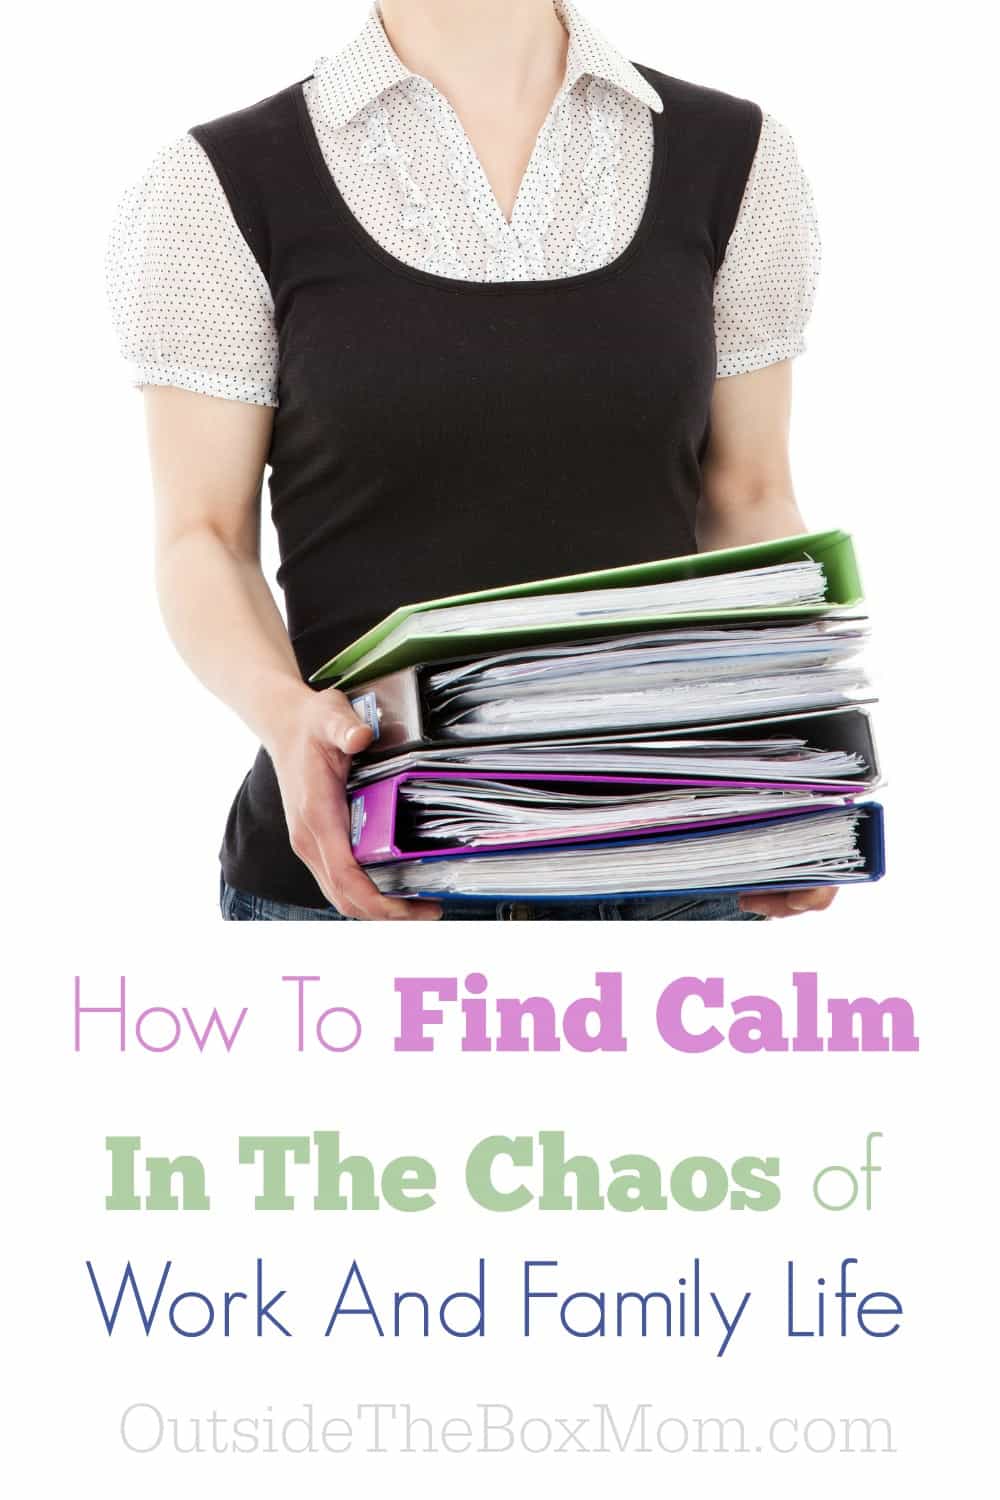 I’m overwhelmed by the busyness of my life. It’s like I live on a rollercoaster racing between work and home. I feel like time is constantly slipping away from me. How did I get this way and will I ever get it under control? I'm so glad I found this post. It IS possible to find calm in the chaos of work and family life! Here are my best tips for surviving and enjoying life as a working mother. 